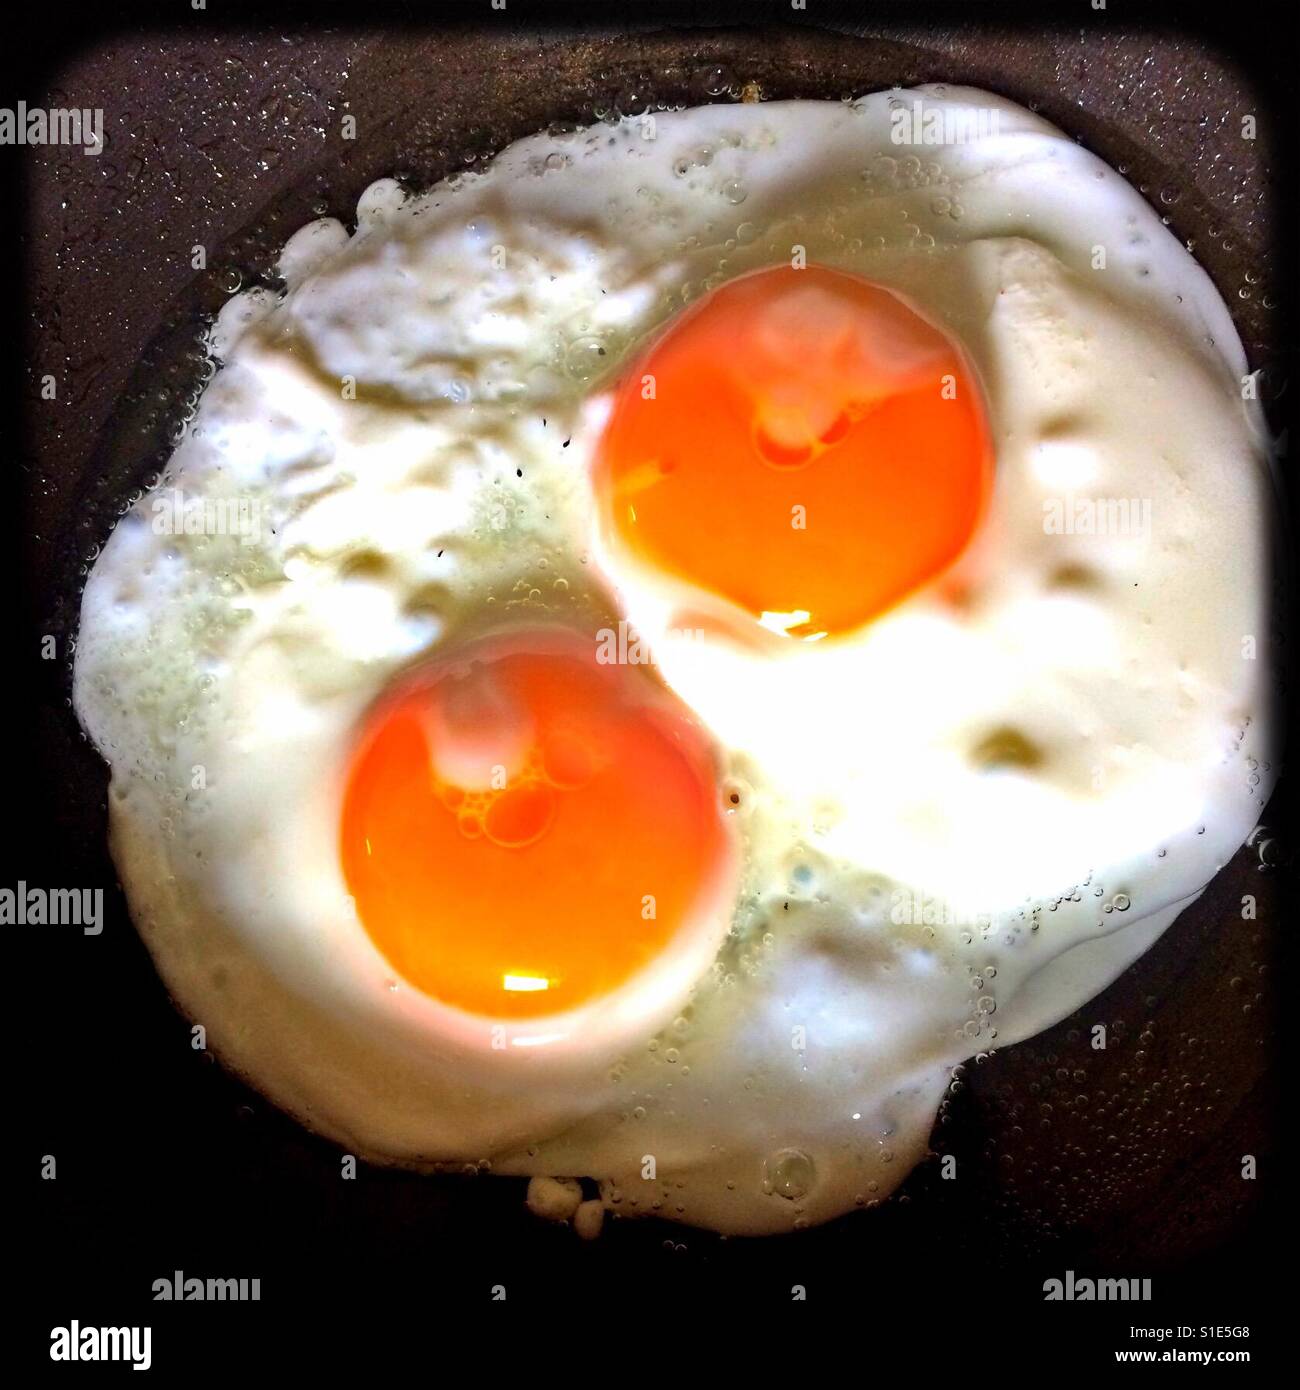 4 four fried egg yolks in frying pan Stock Photo - Alamy